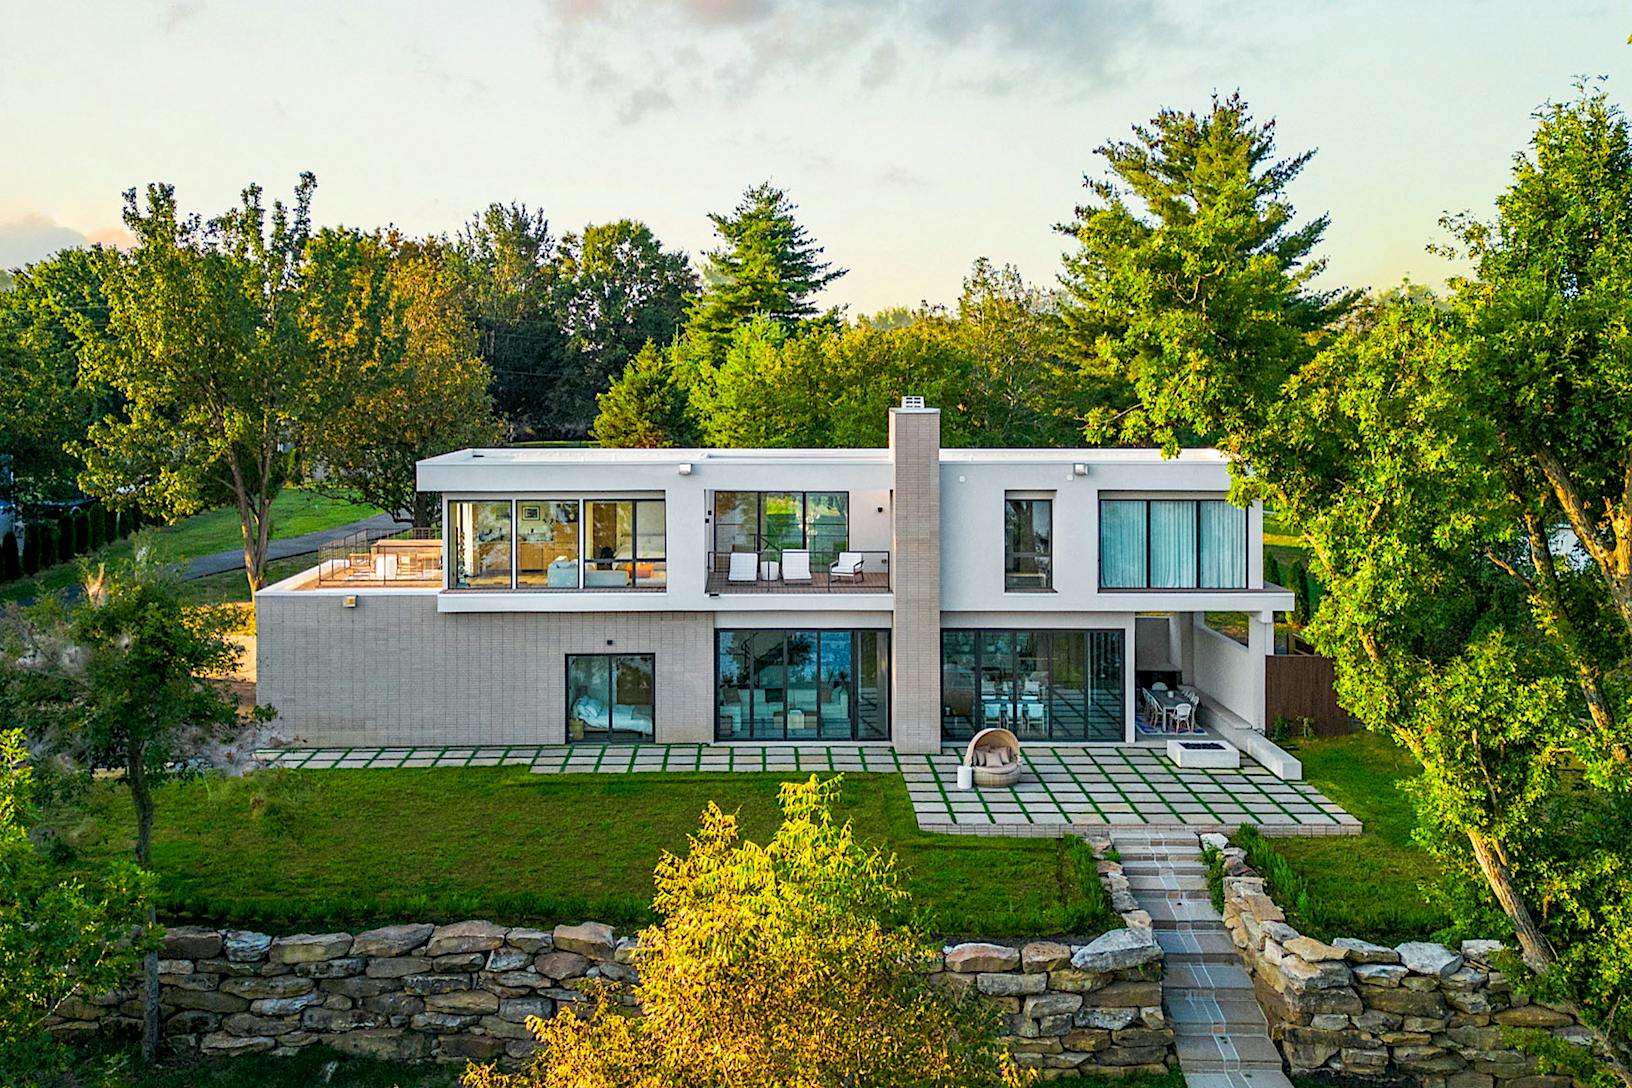 A modern two-story house with large glass wall panels, surrounded by trees and greenery, featuring a spacious patio.